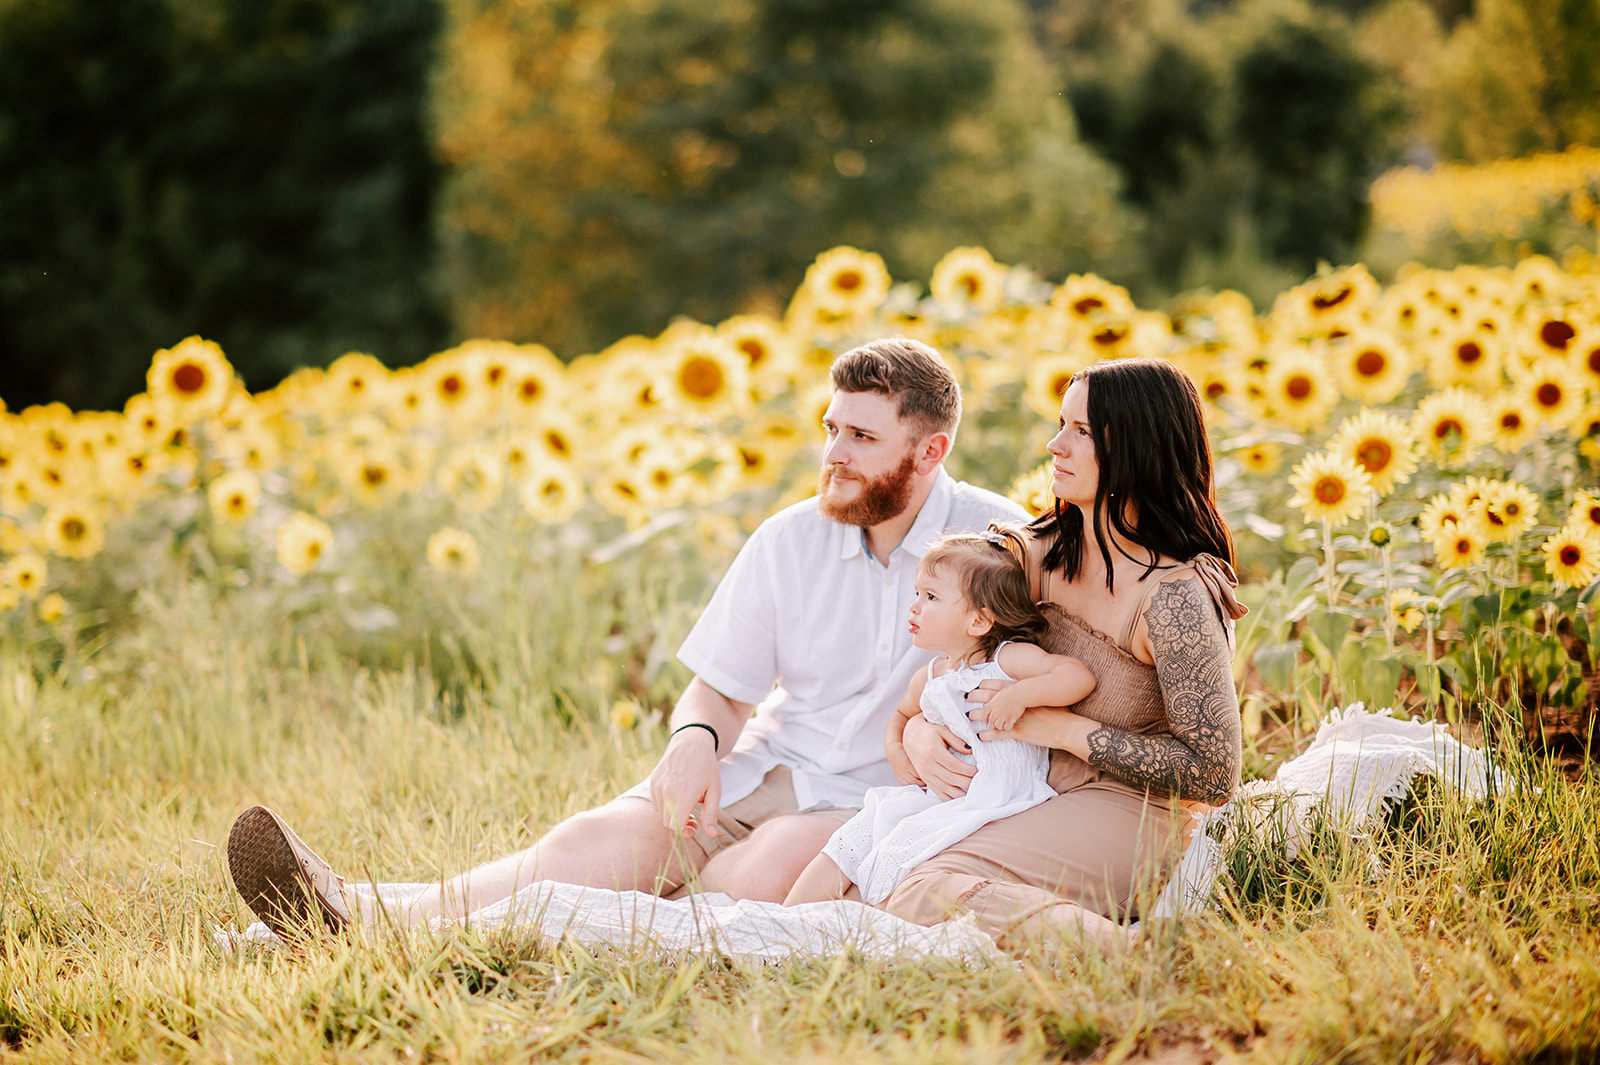 A pregnant mother sits on a picnic blanket with her toddler daughter in her lap and husband at her side in a field of sunflowers